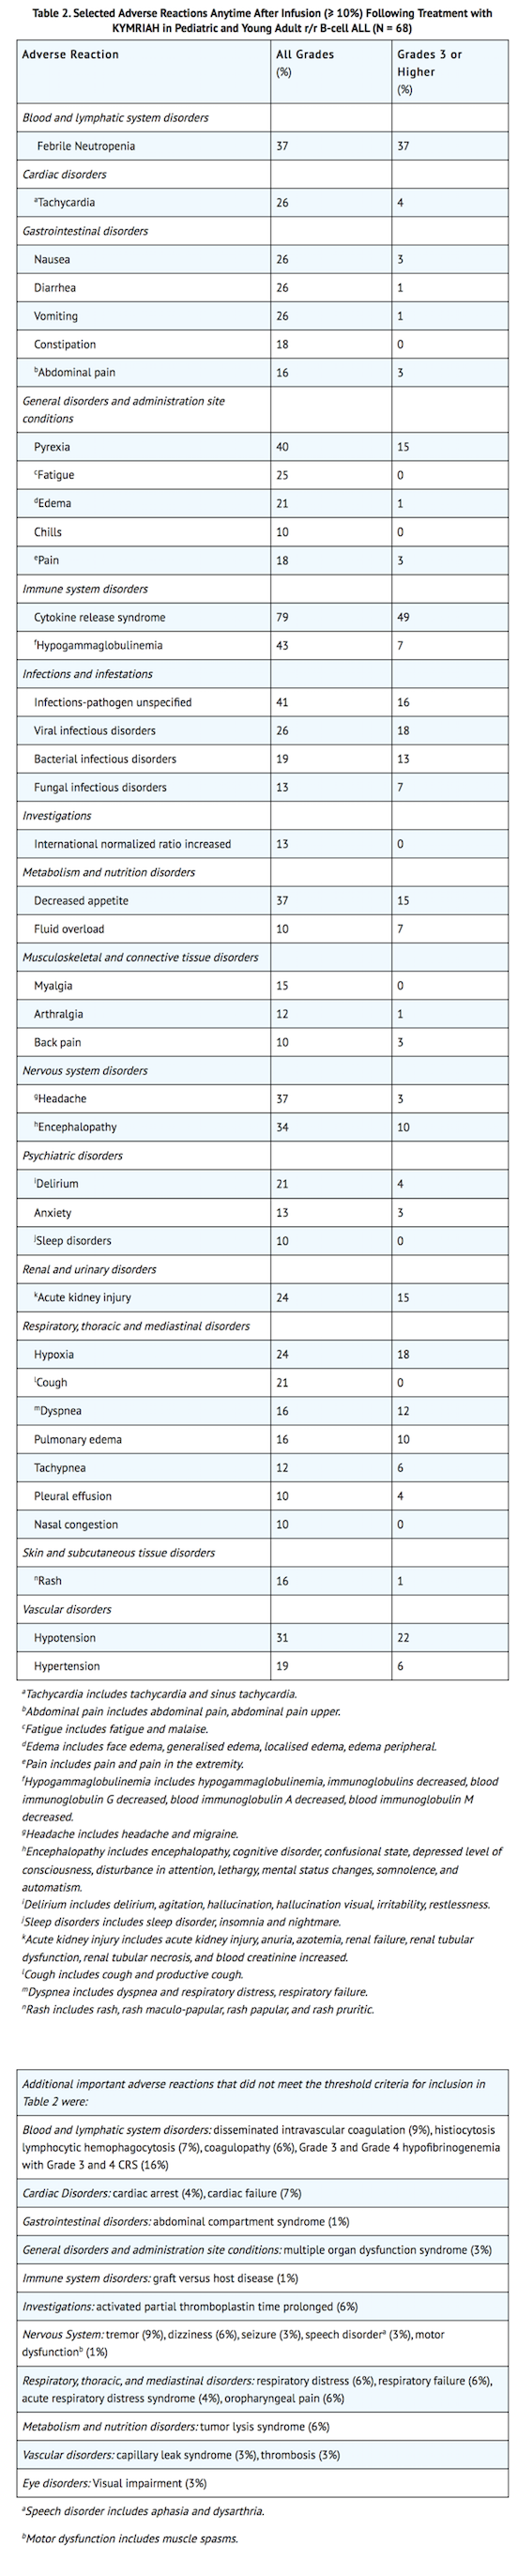 File:Tisagenlecleucel Adverse Reactions Tables 1 and 2.png